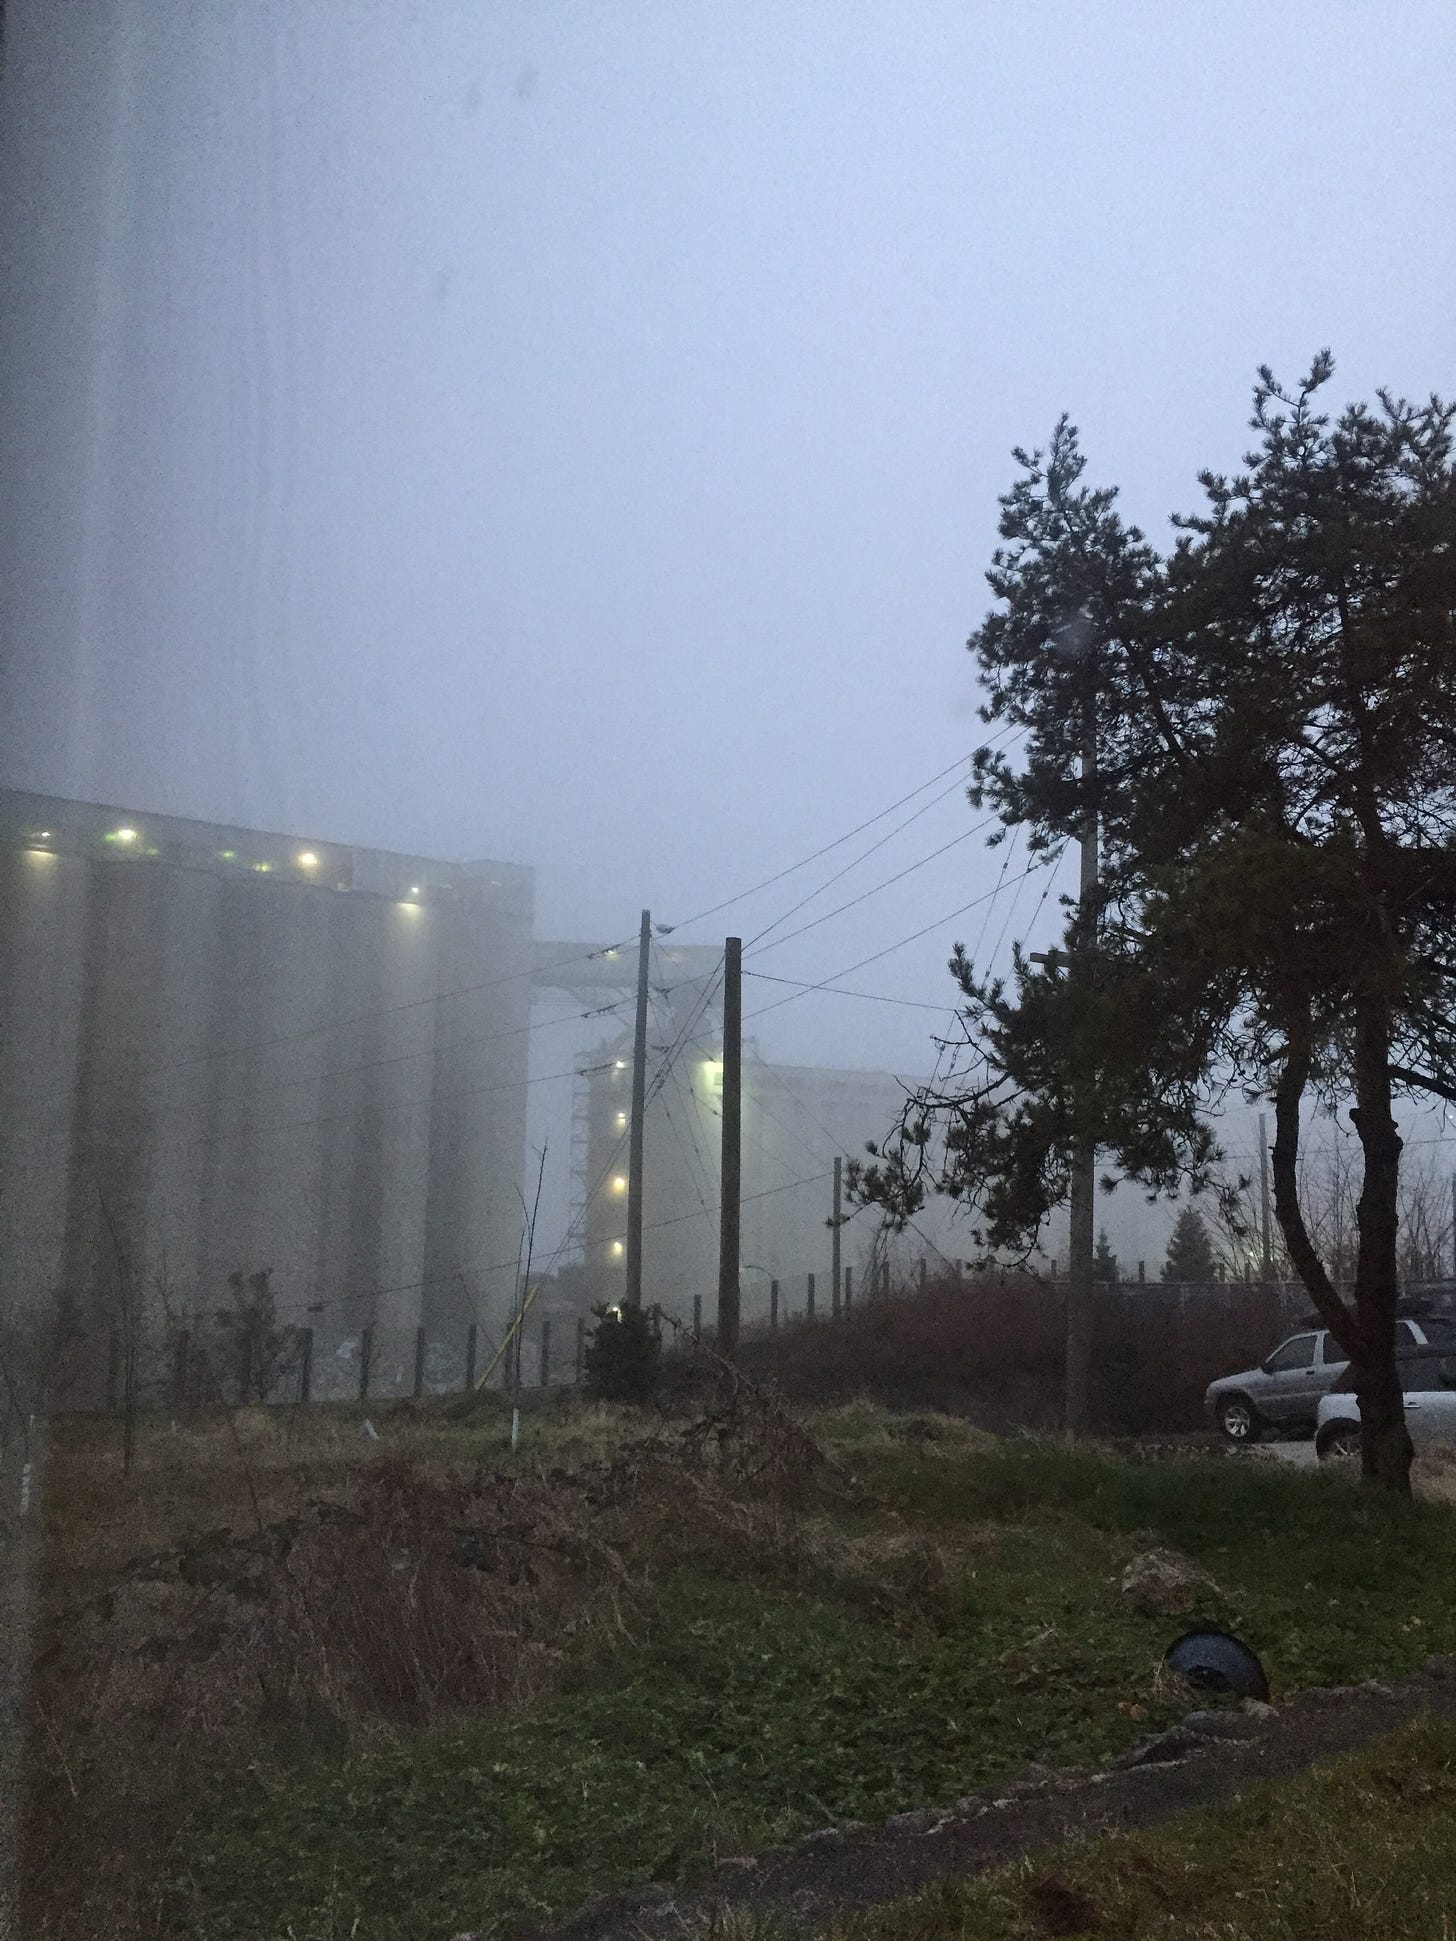 A yard with with a tree on the right hand side, overlooking a foggy horizon of dimly-lit grain silos at the harbour.